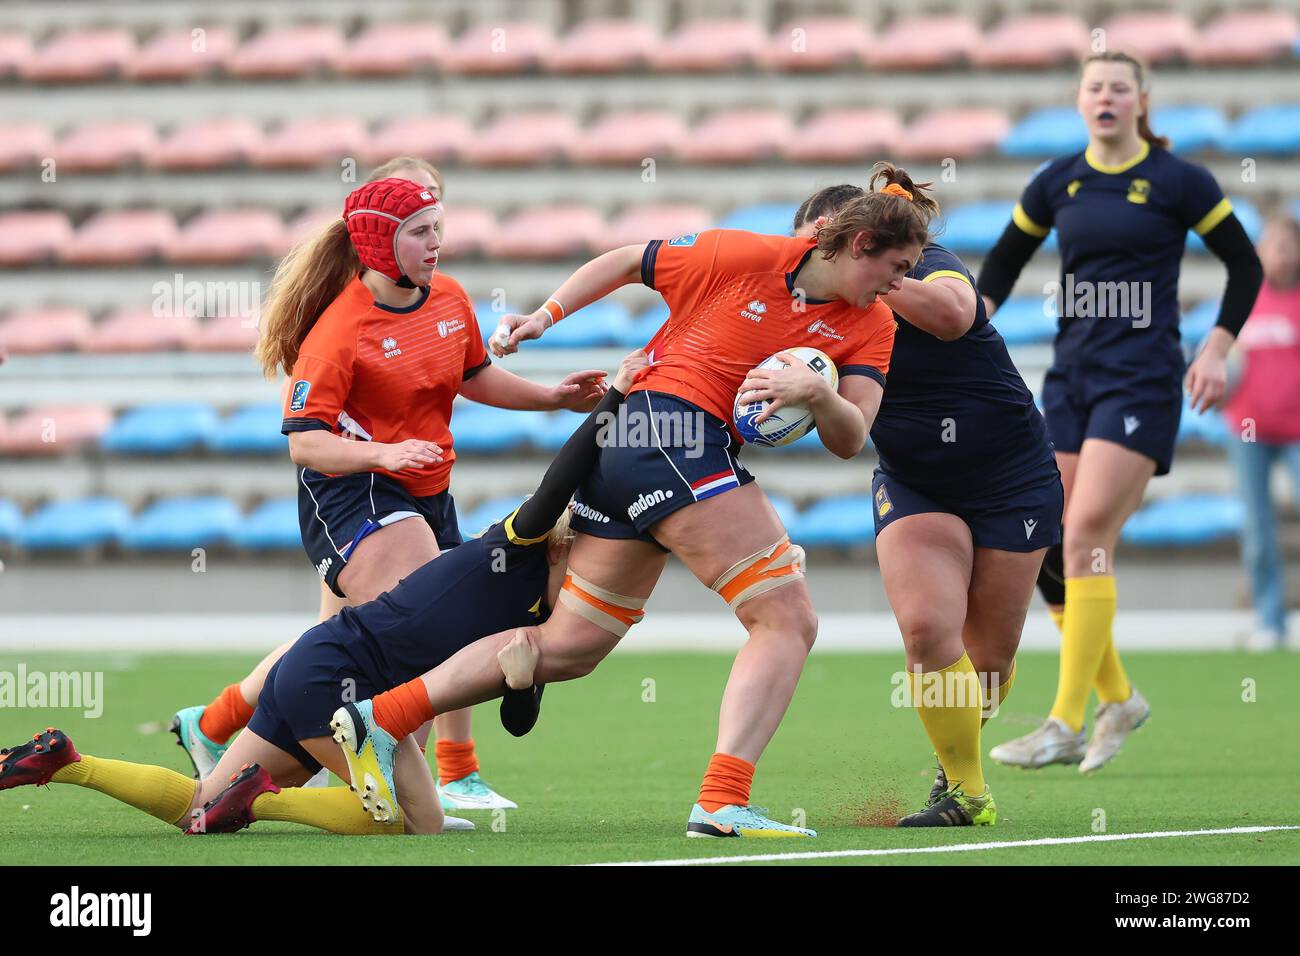 AMSTERDAM, NETHERLANDS - FEBRUARY 03: Anouk Veerkamp player of Hartpury college (GB) Linde van der Velden player of Exeter Chiefs (GB) during the inte Stock Photo